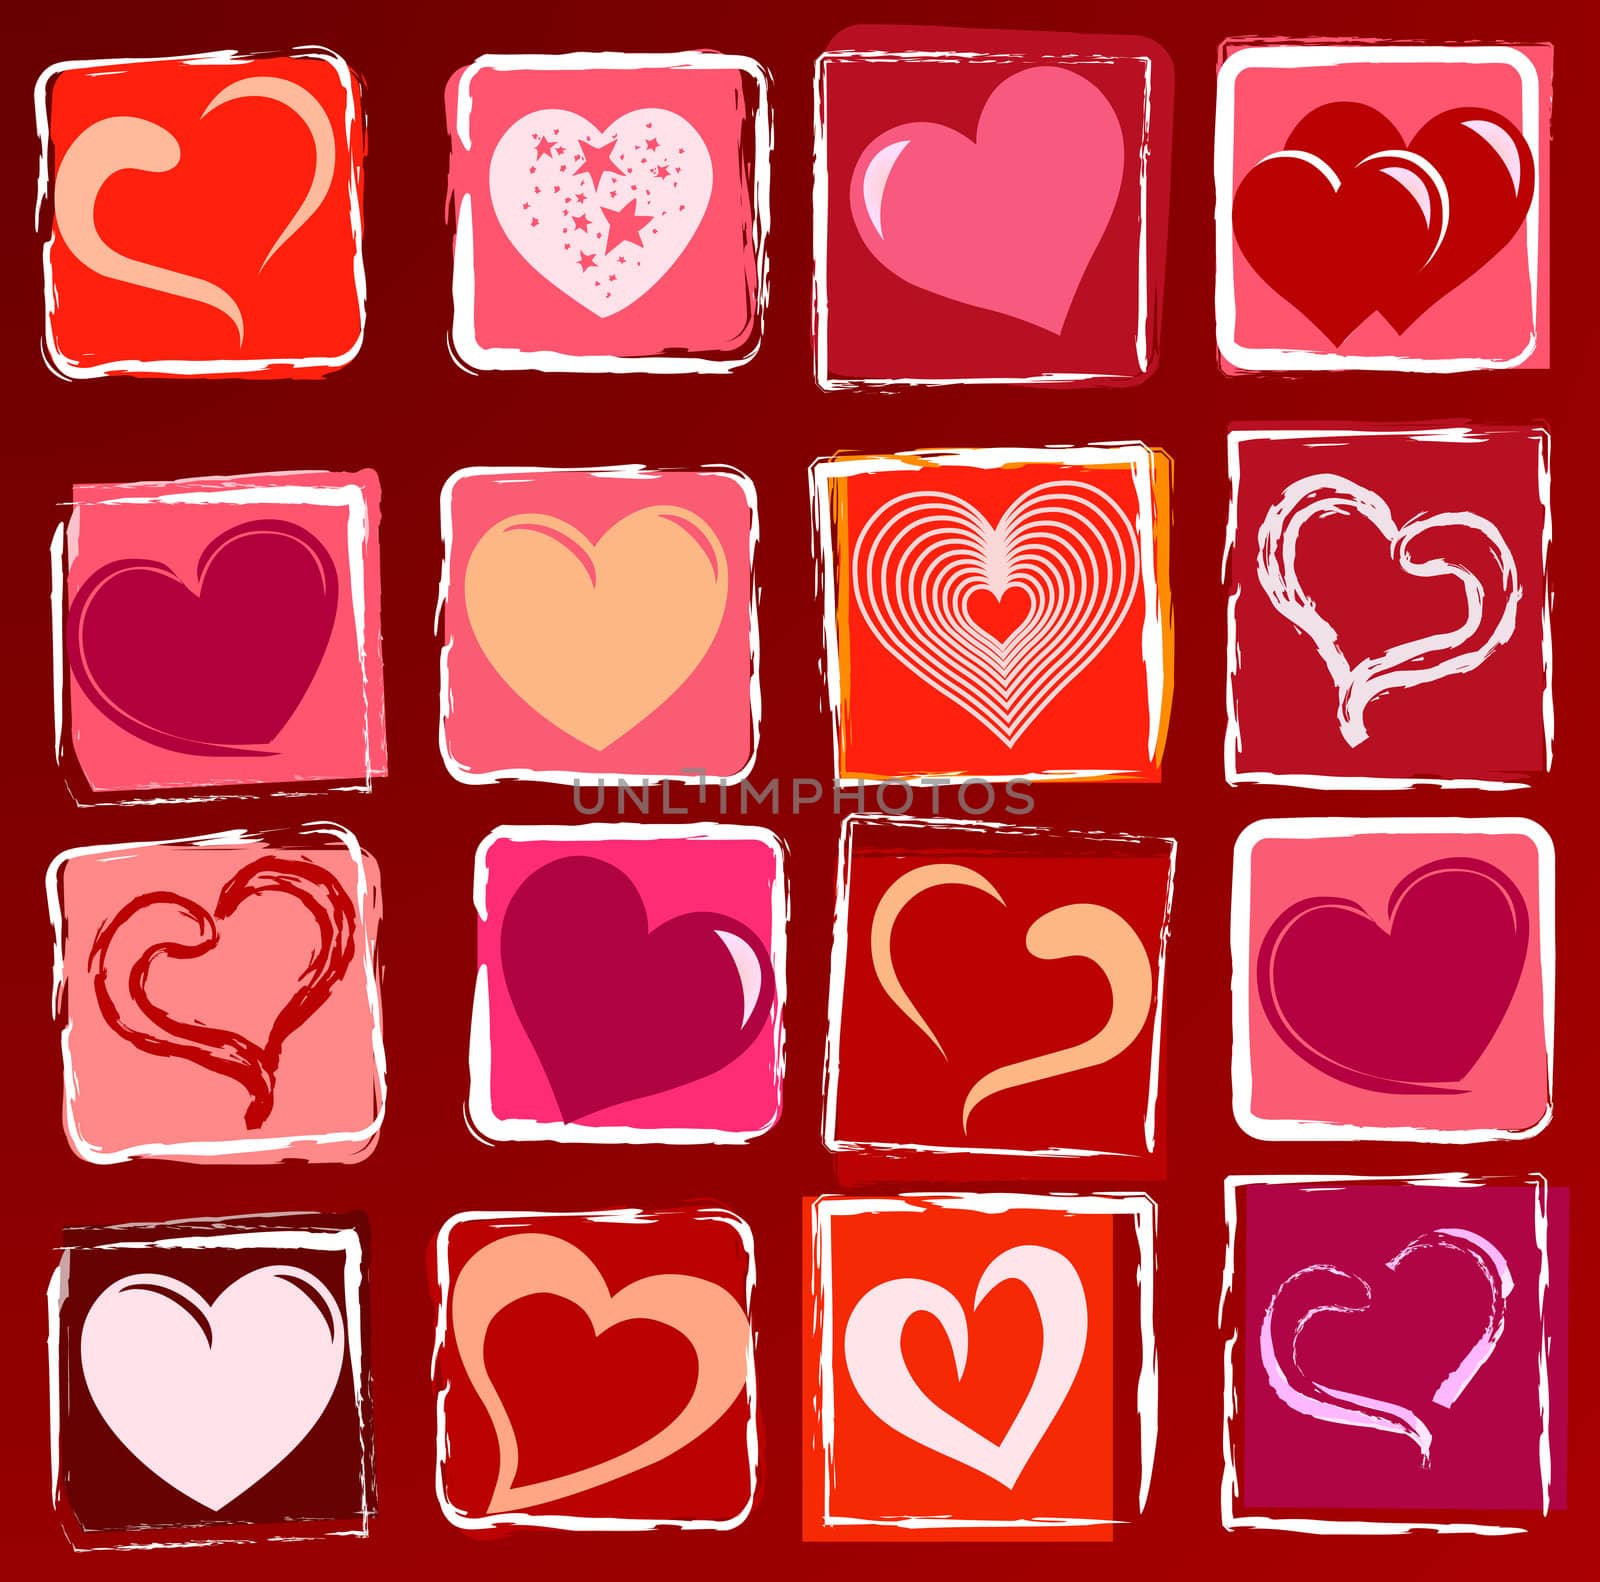 many drawn hearts in white, red, pink, purple, violet, orange, beige over wine-red background